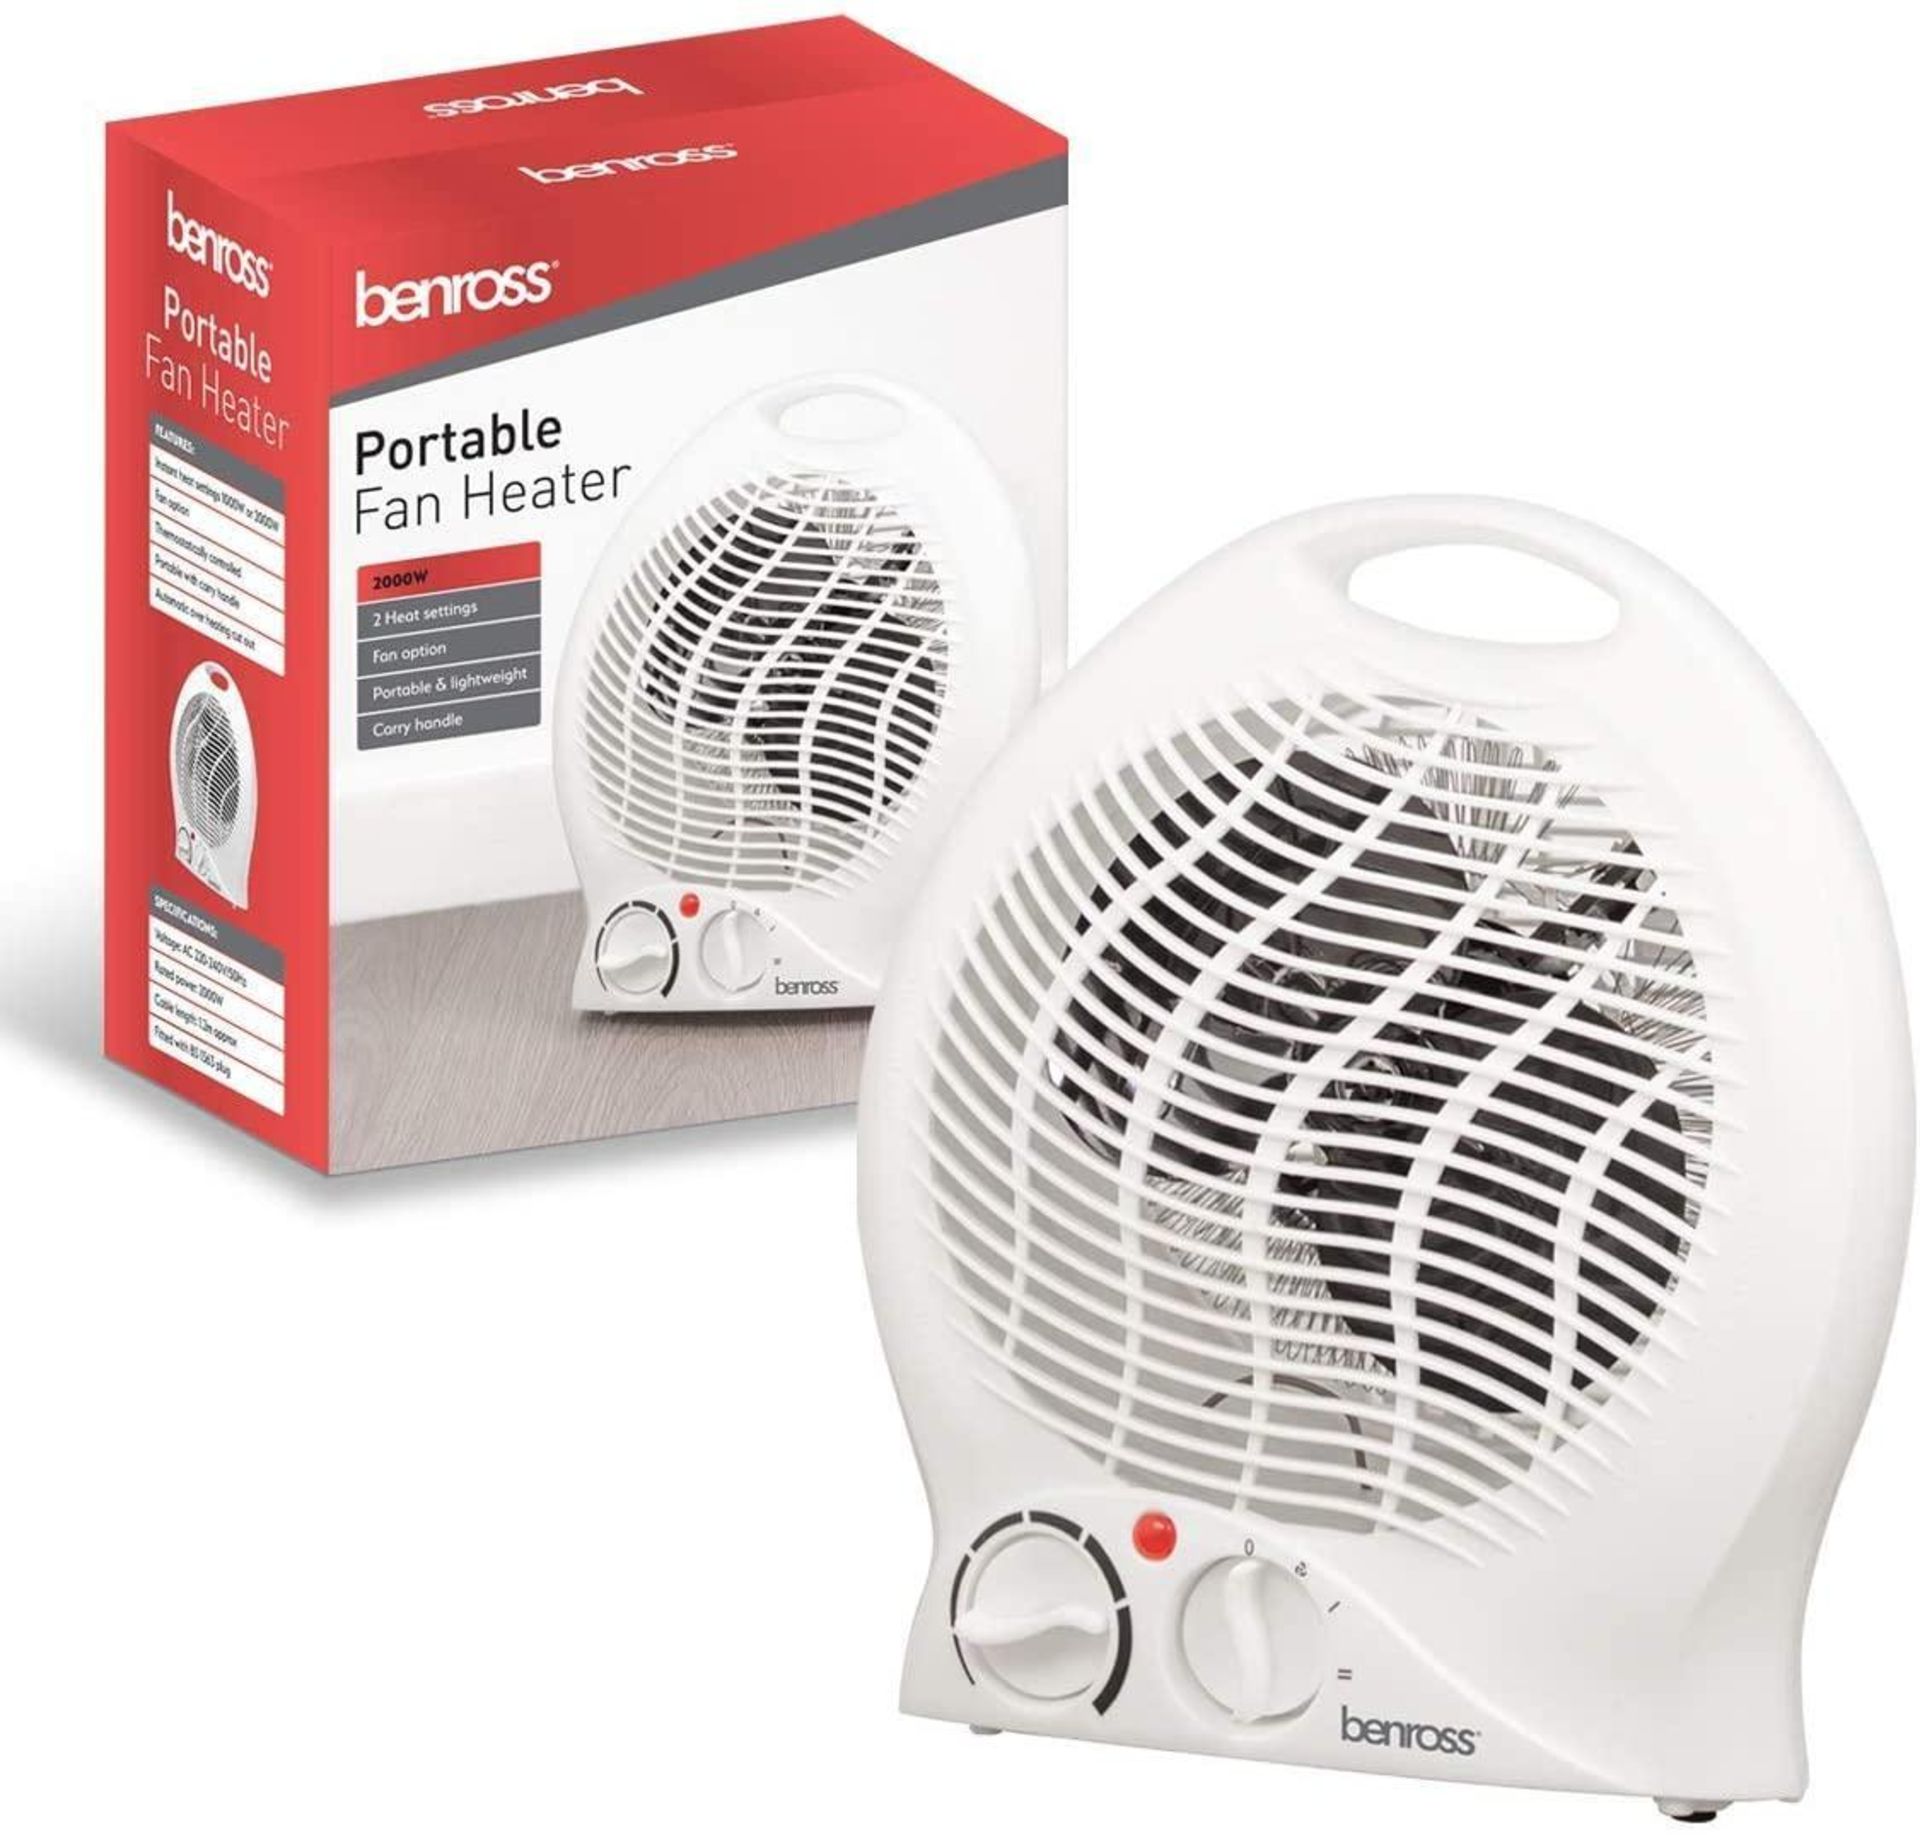 Benross 2000W Portable Fan Heater with Carry Handle White with Heat and Cooling